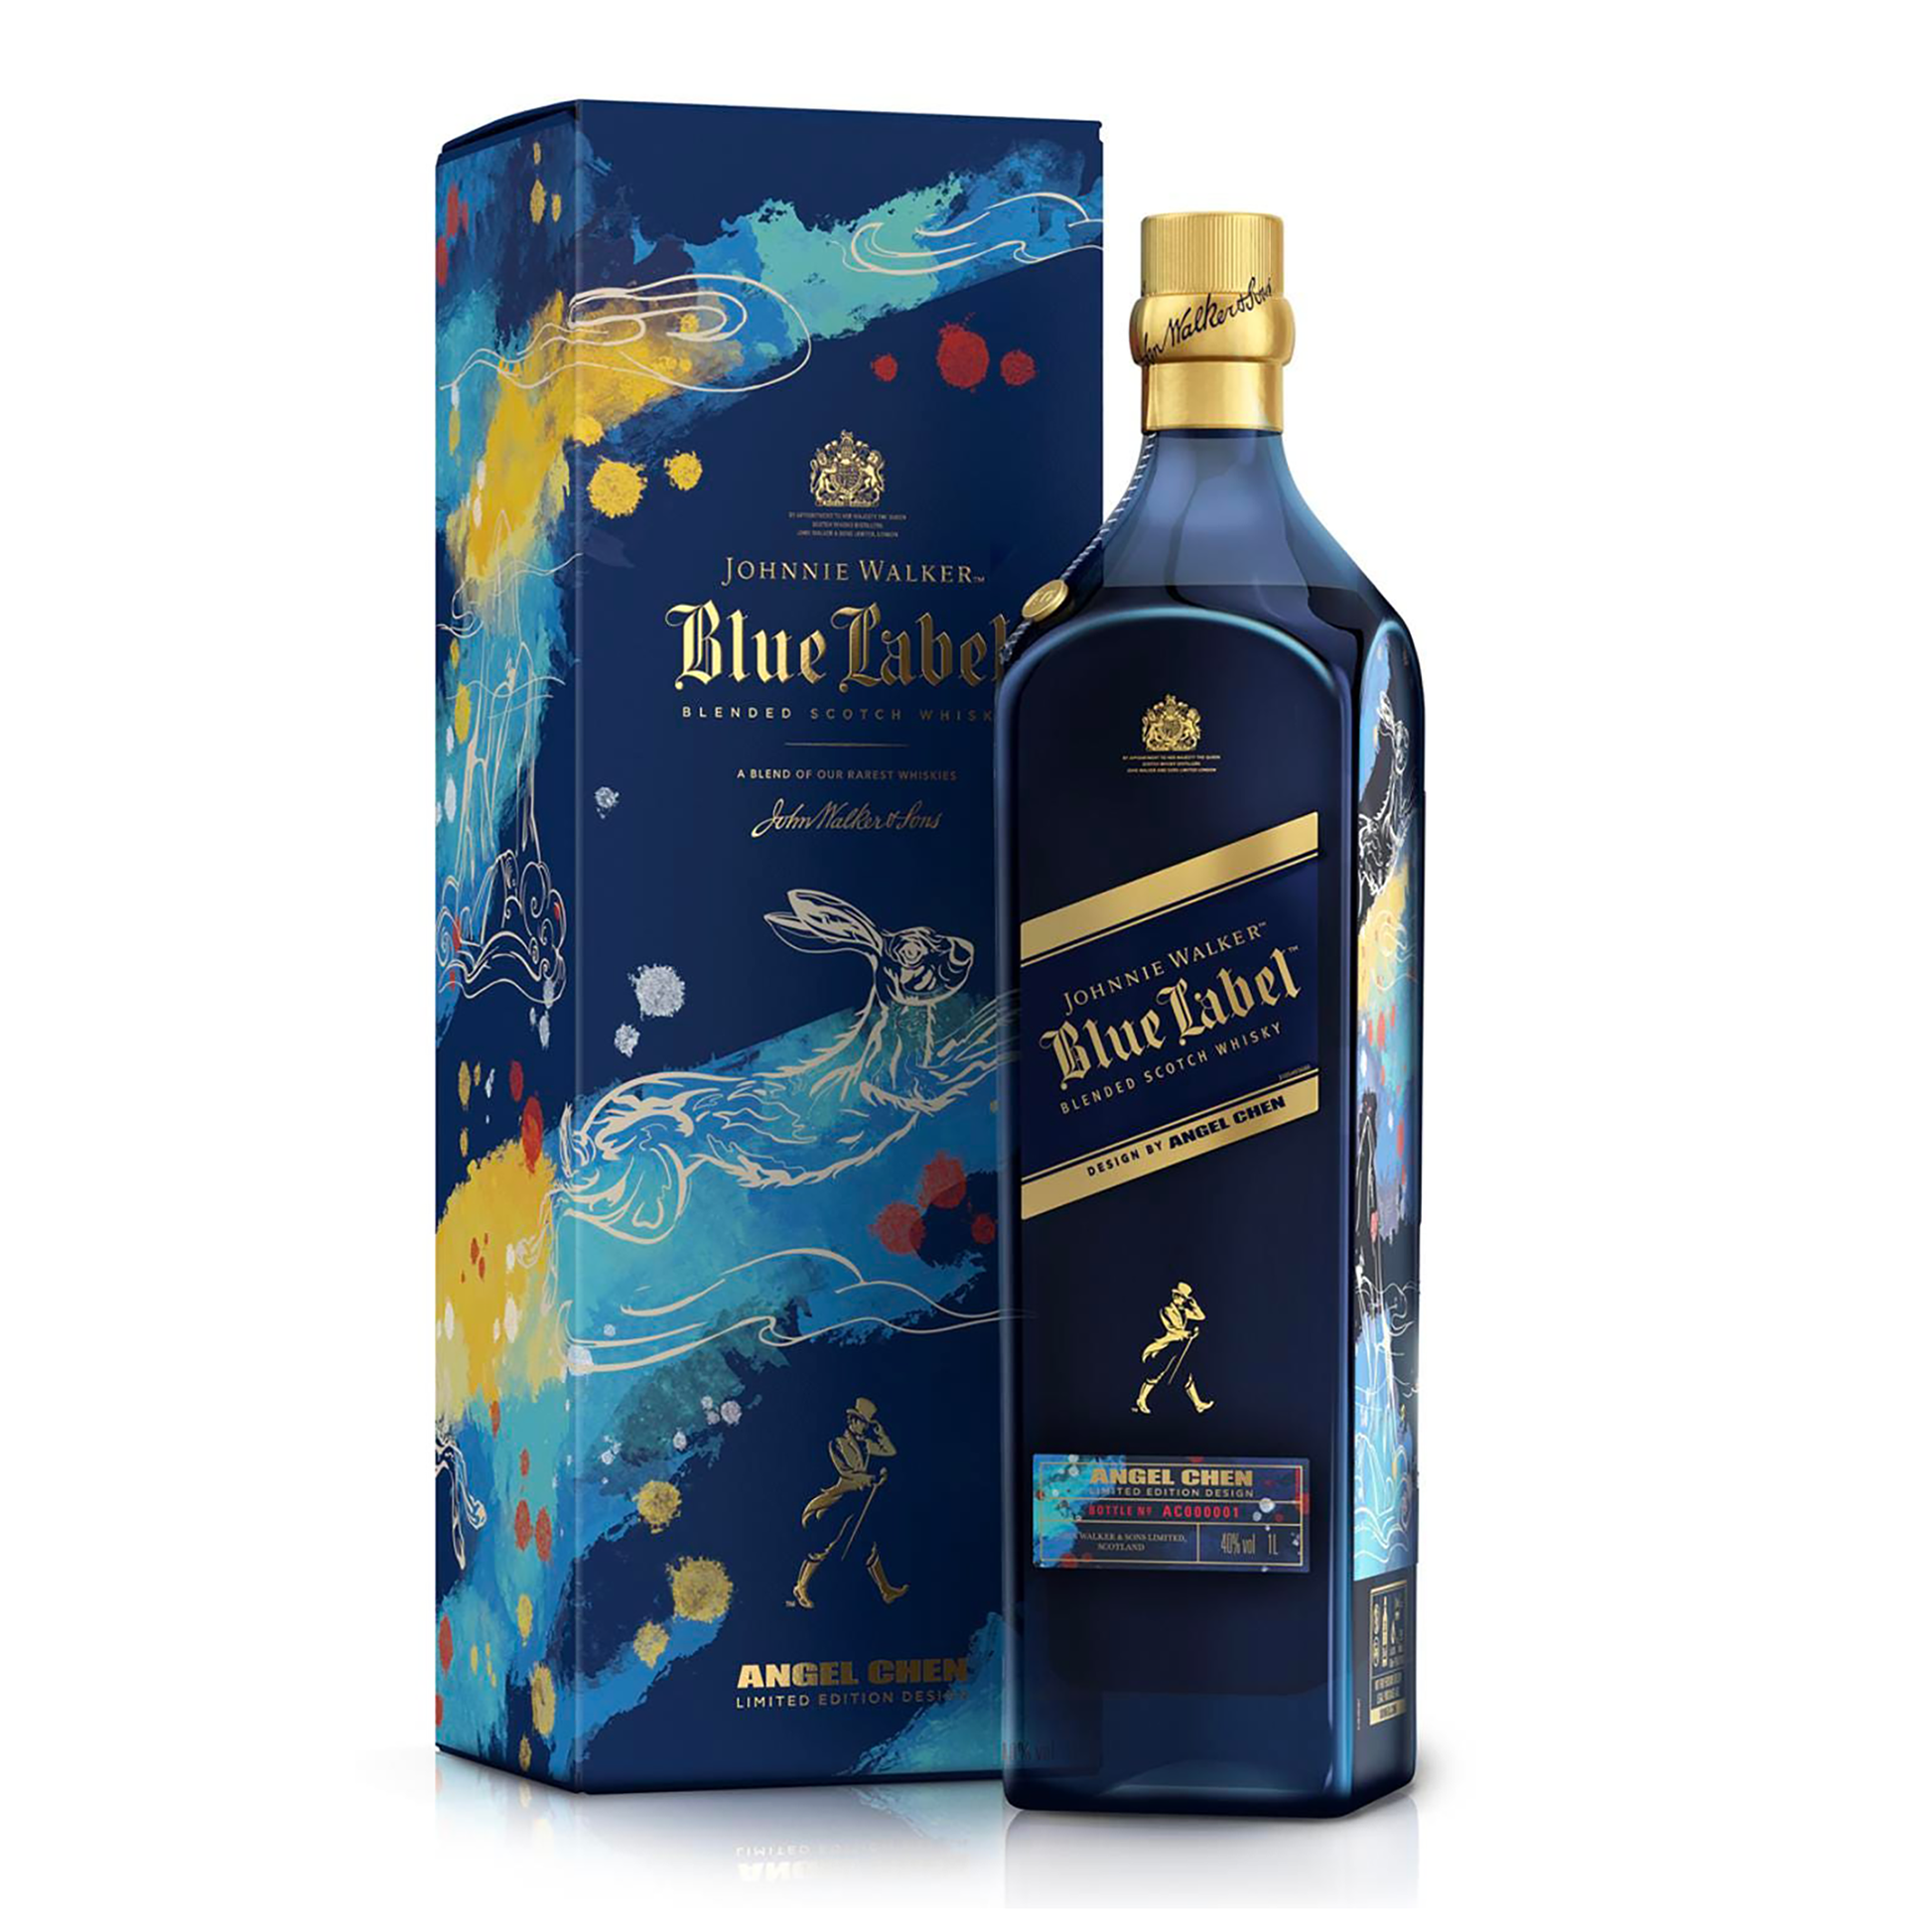 Johnnie Walker Blue Label Chinese New Year Limited Edition Year of the Rabbit Blended Scotch Whisky 700ml - CBD Cellars